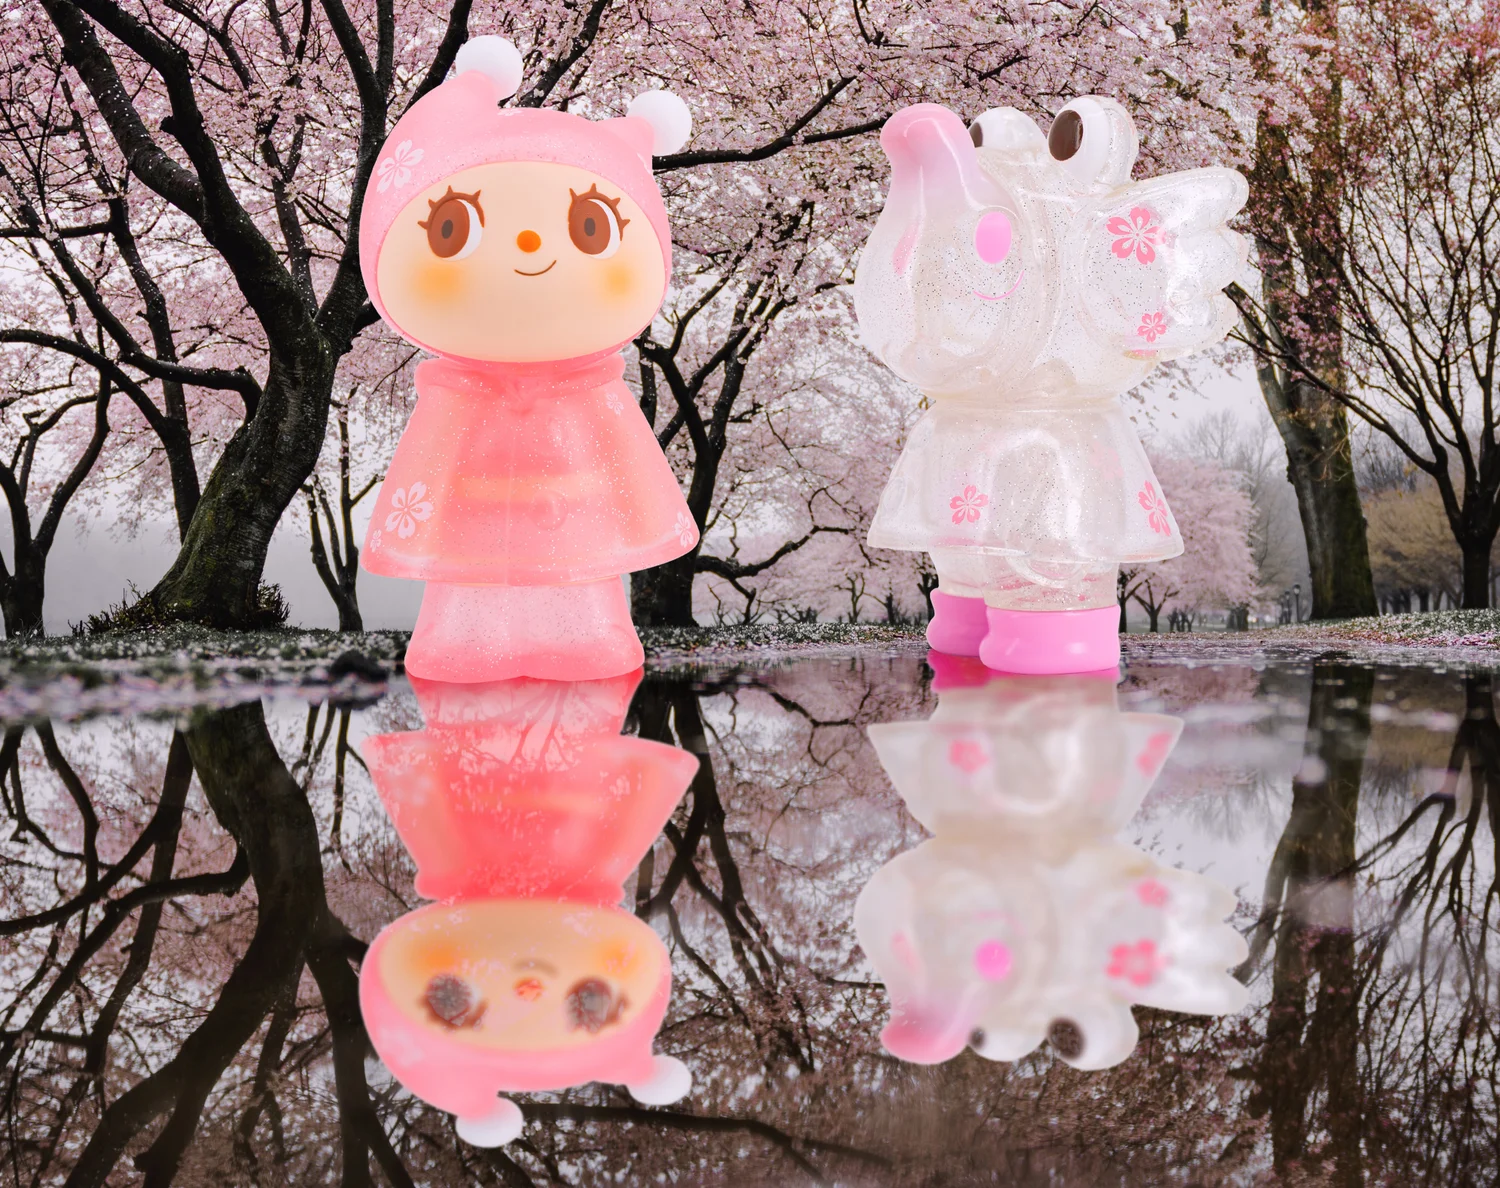 A picture containing tree, pink, doll

Description automatically generated